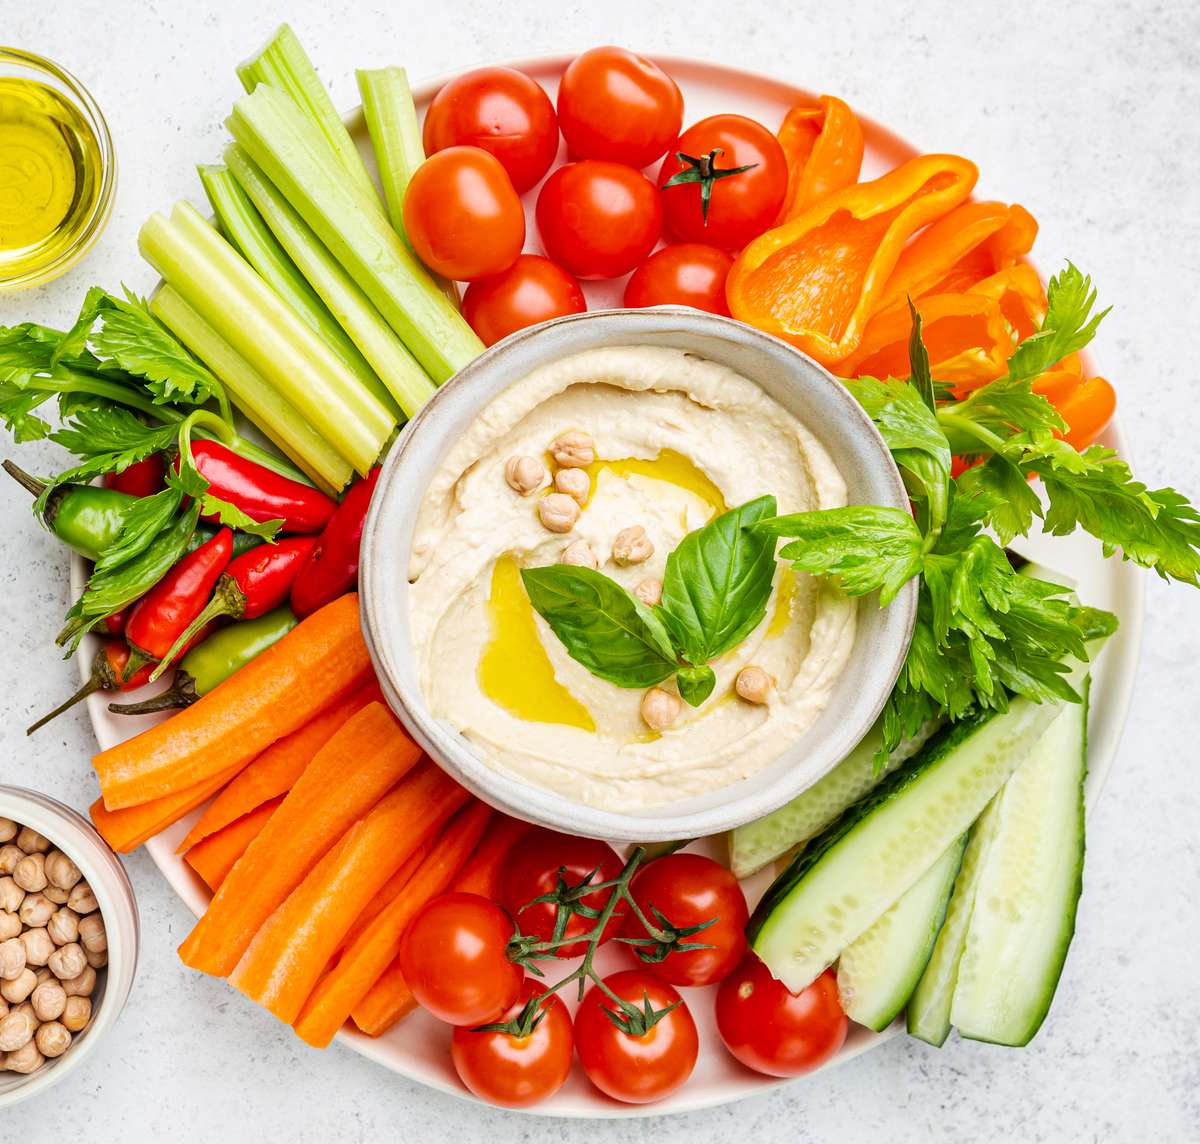 healthy vegan and vegetarian choices with the Mediterranean diet